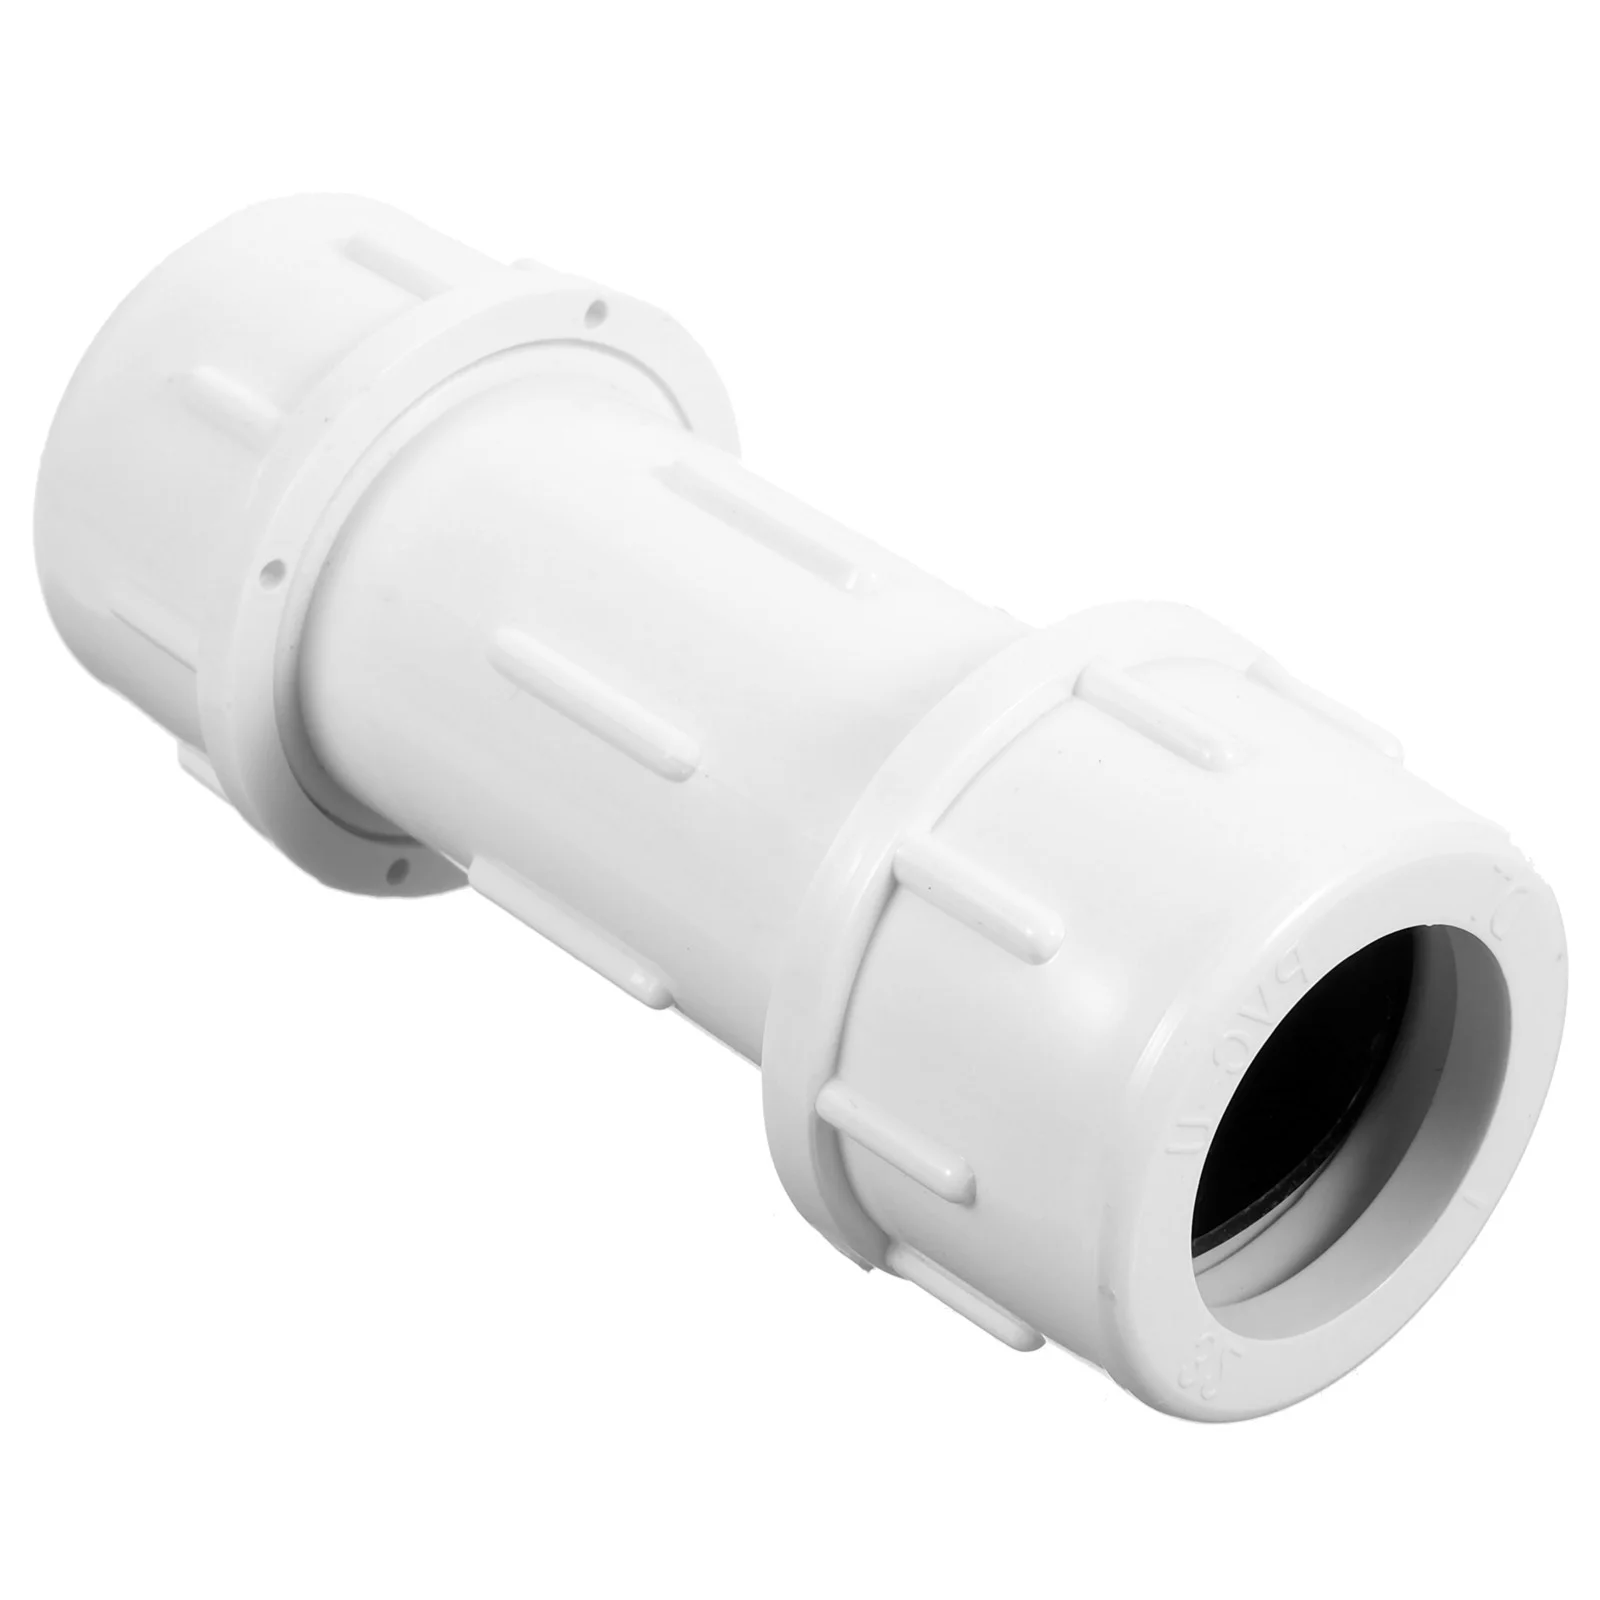 

Pipe Connector Check Valve Pvc Connectors Accessories Fittings Adapters Bulk Garden Support Structure